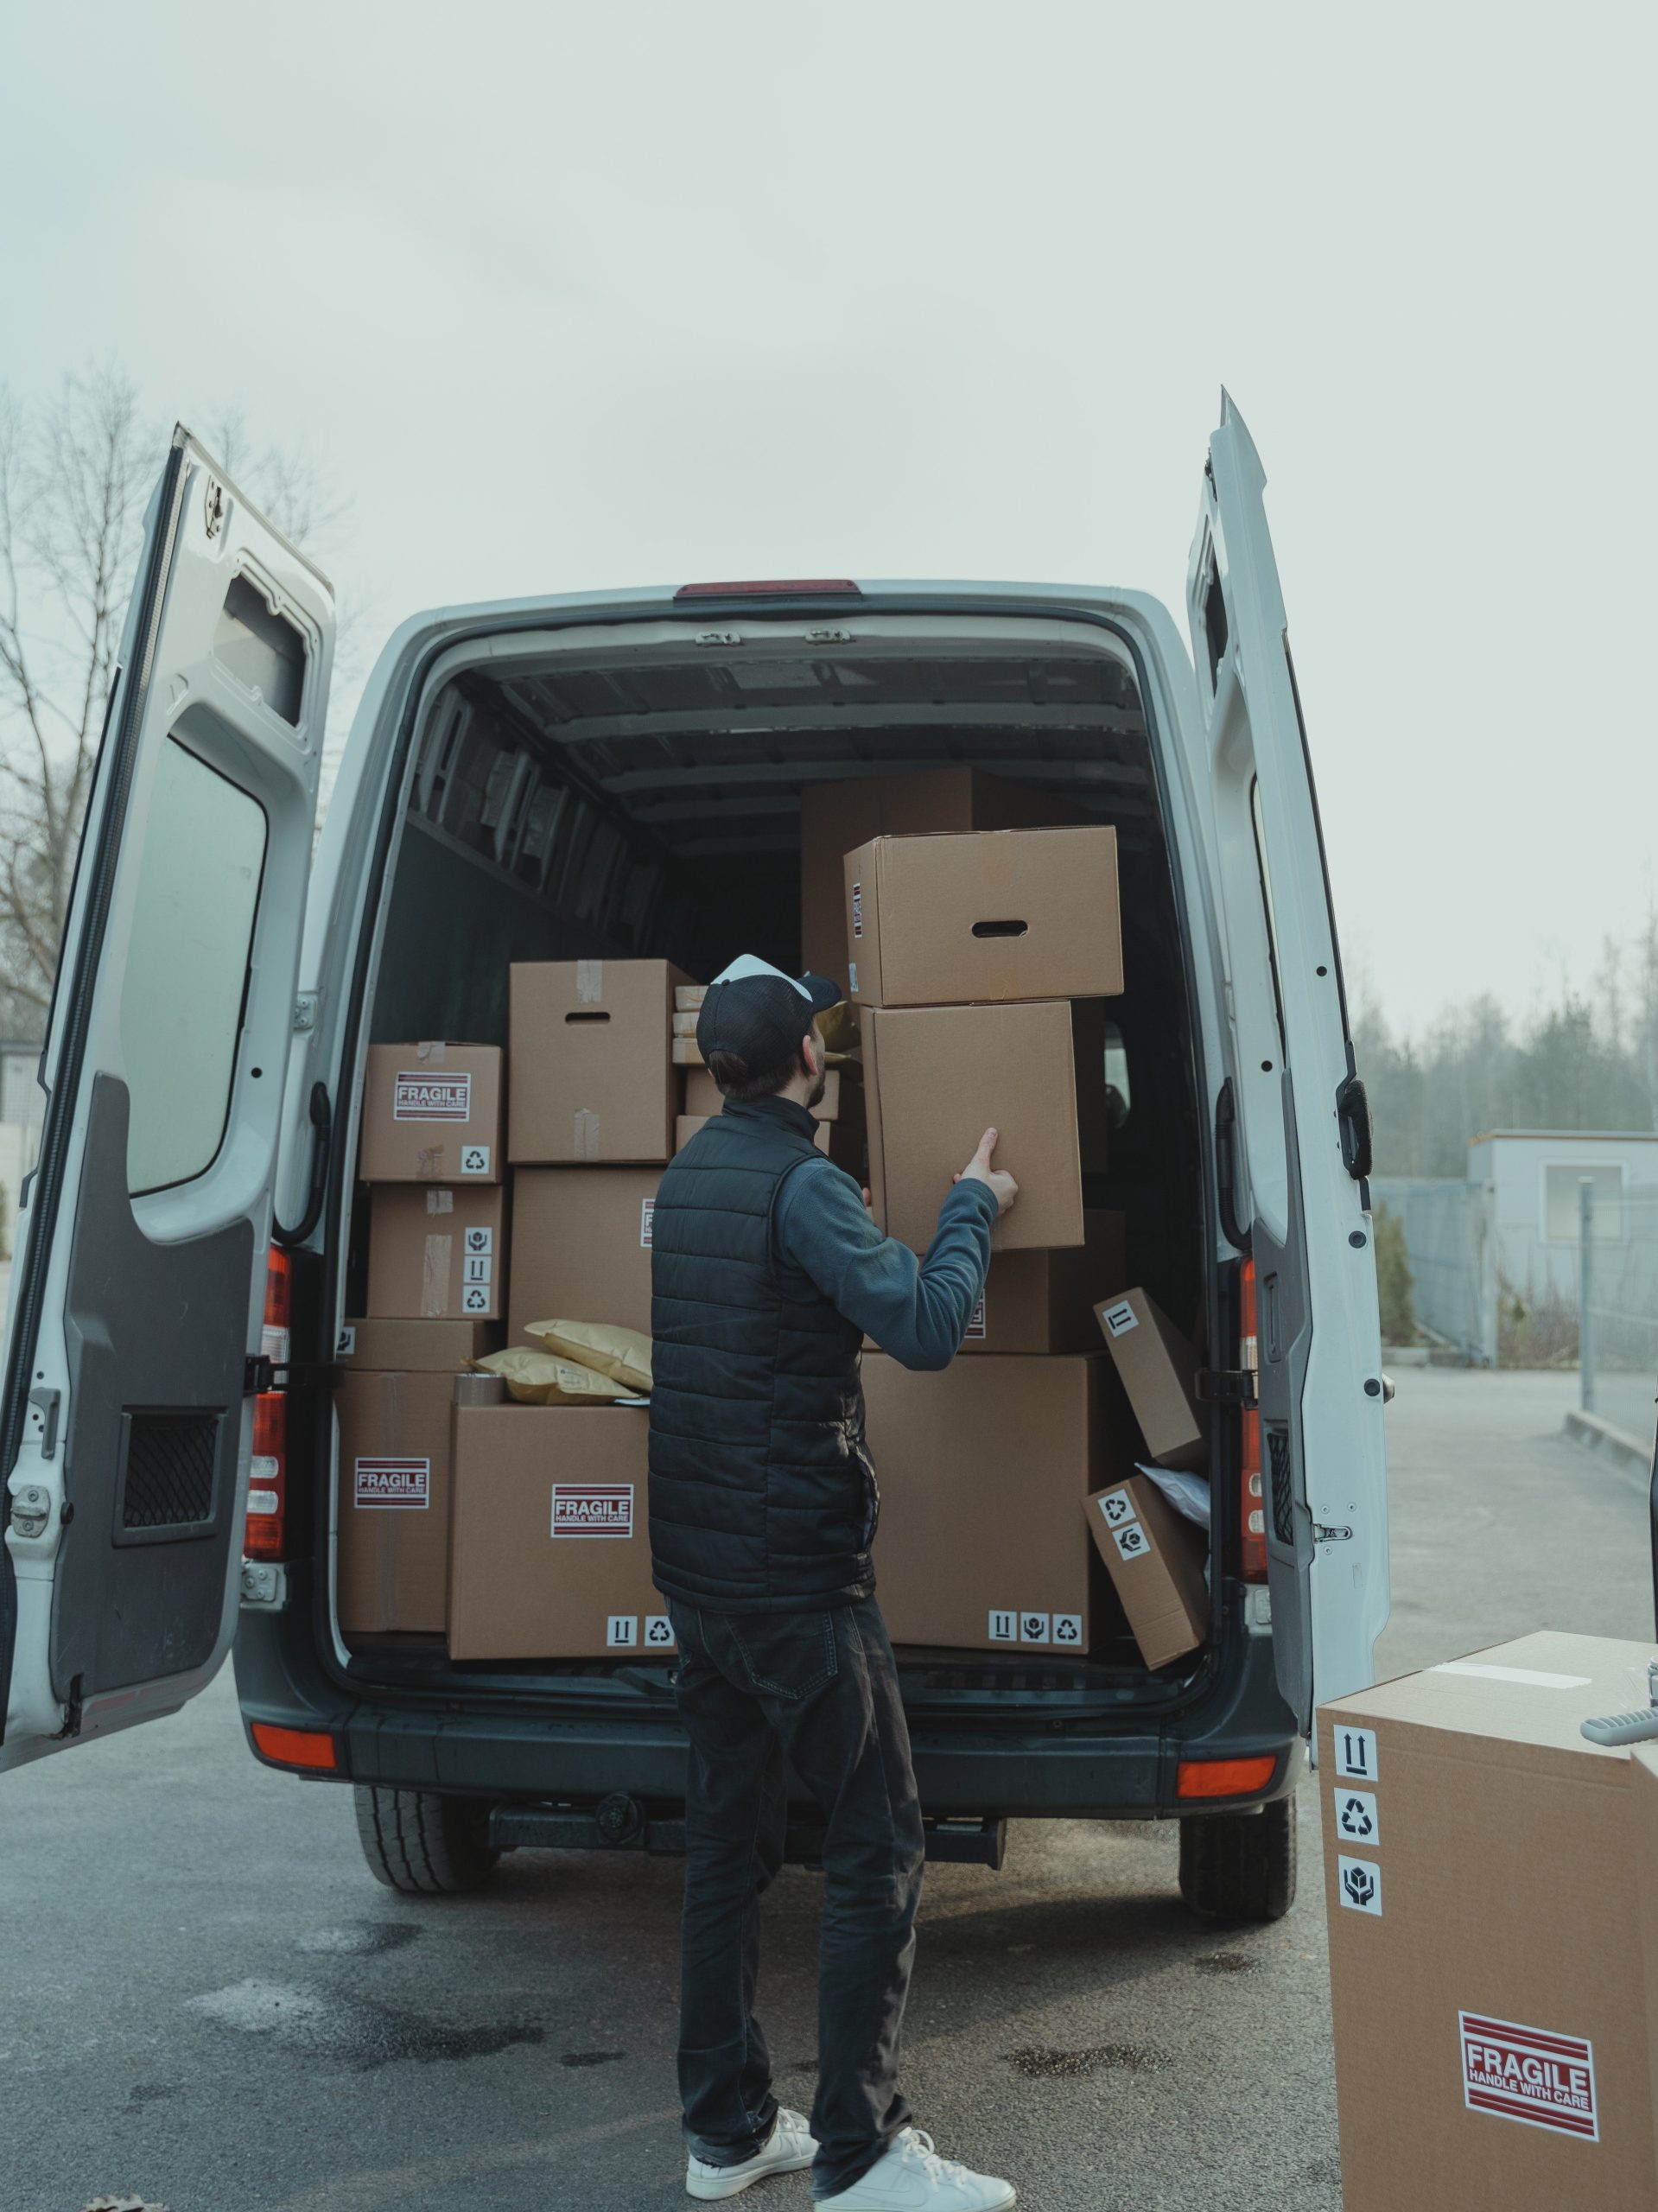 Find out what are the biggest complaints of delivery drivers and how you can address them in your company - Logistia Route Planner 